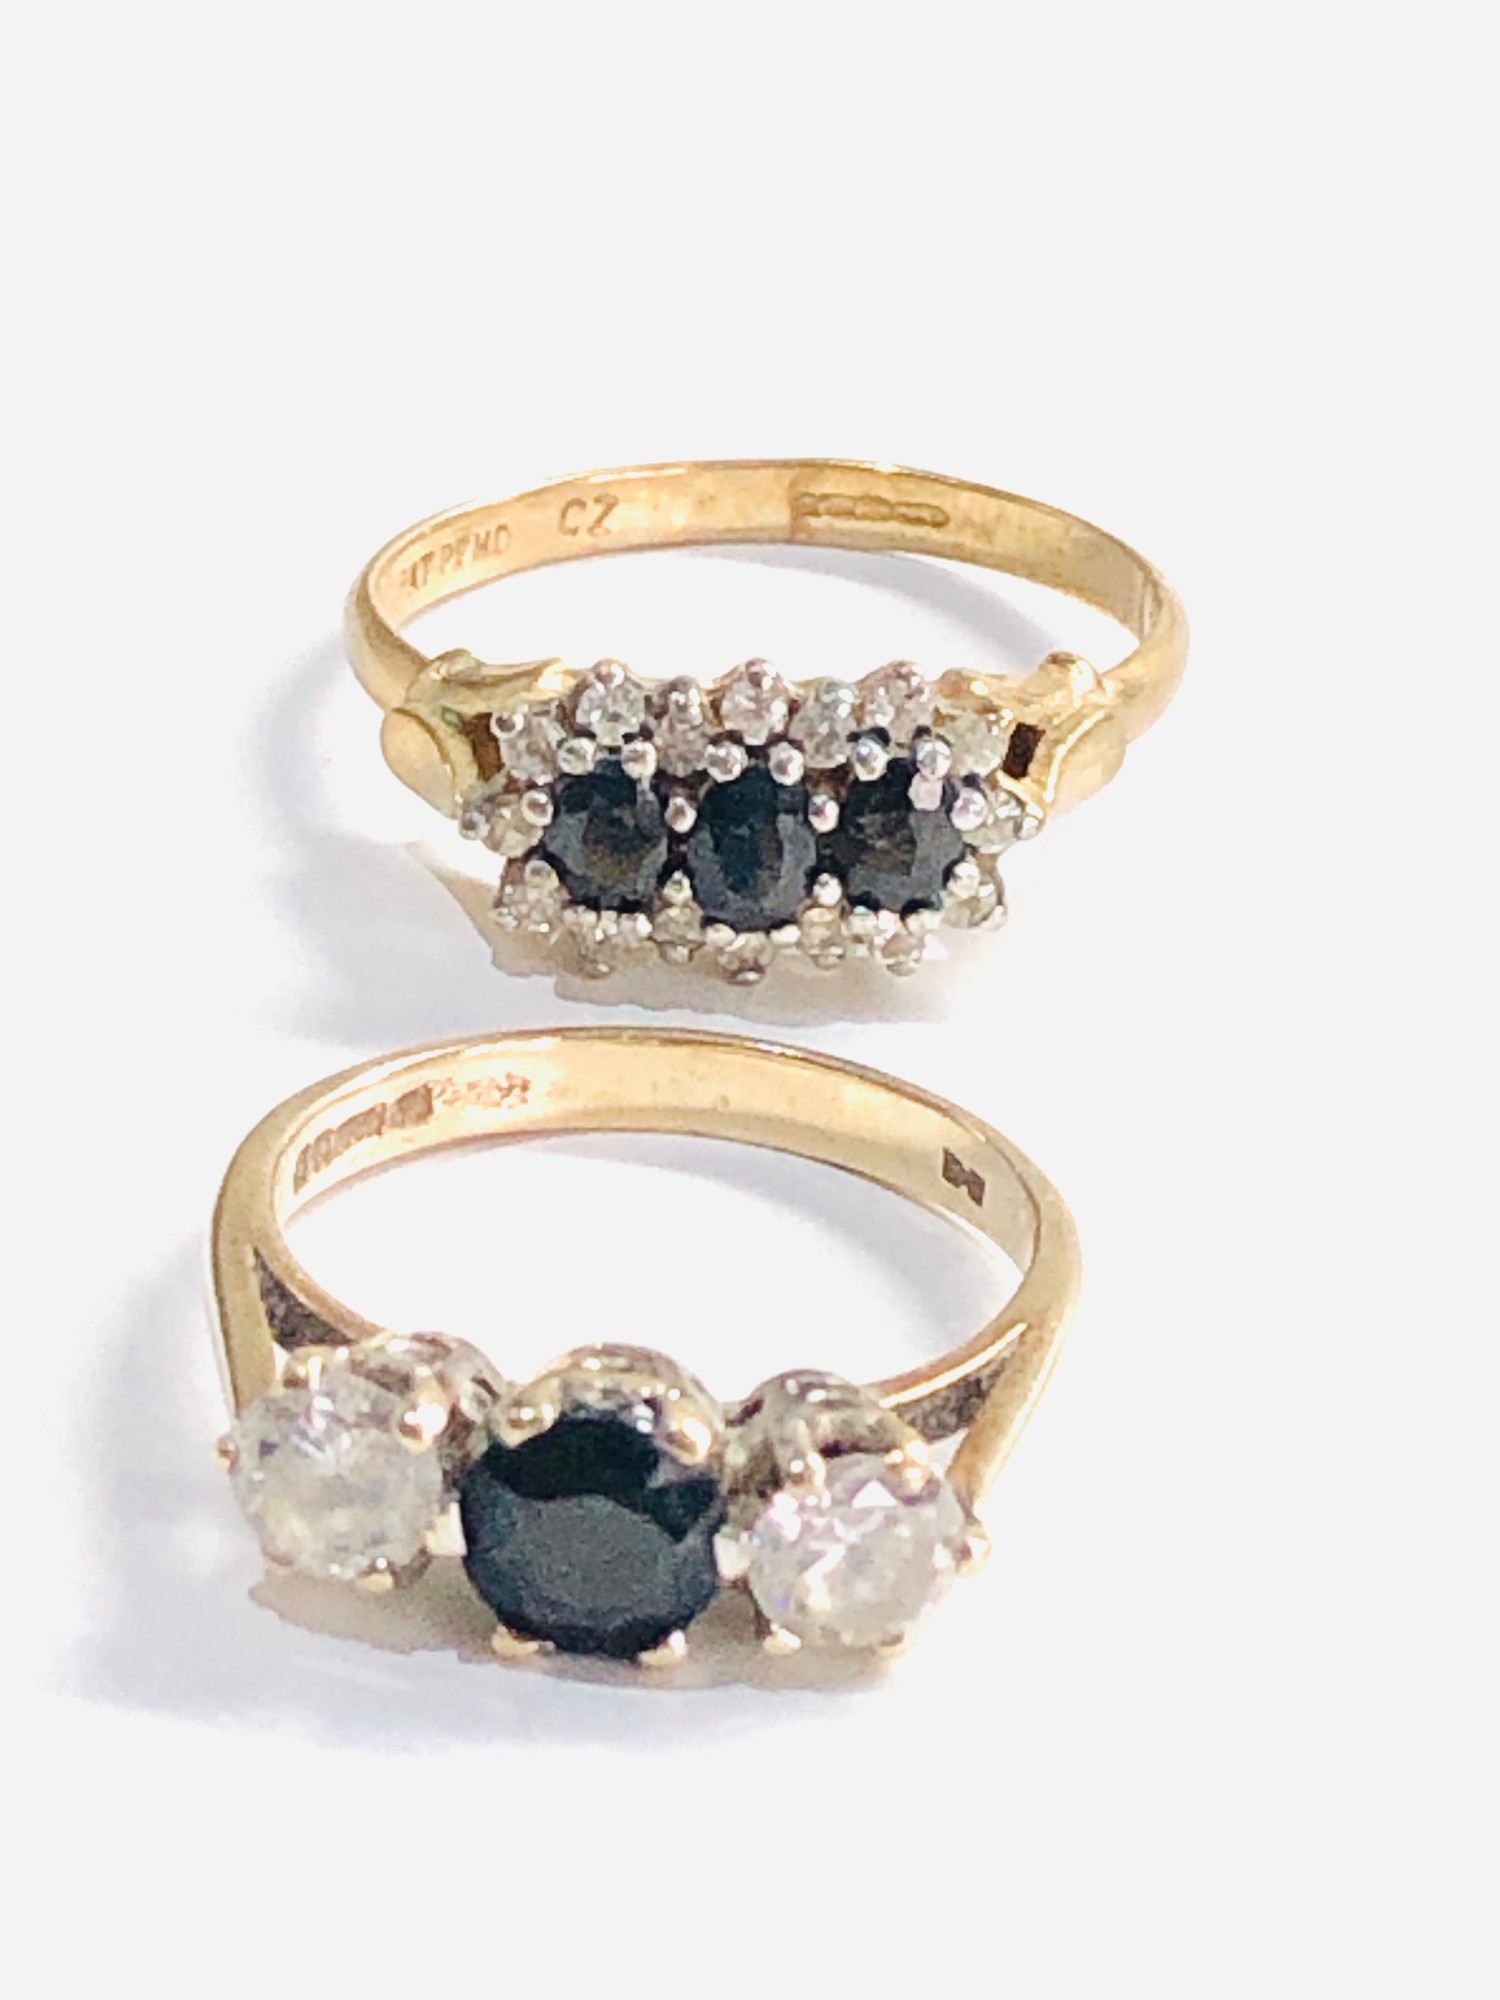 2 x 9ct gold dress rings 5.3g - Image 2 of 3